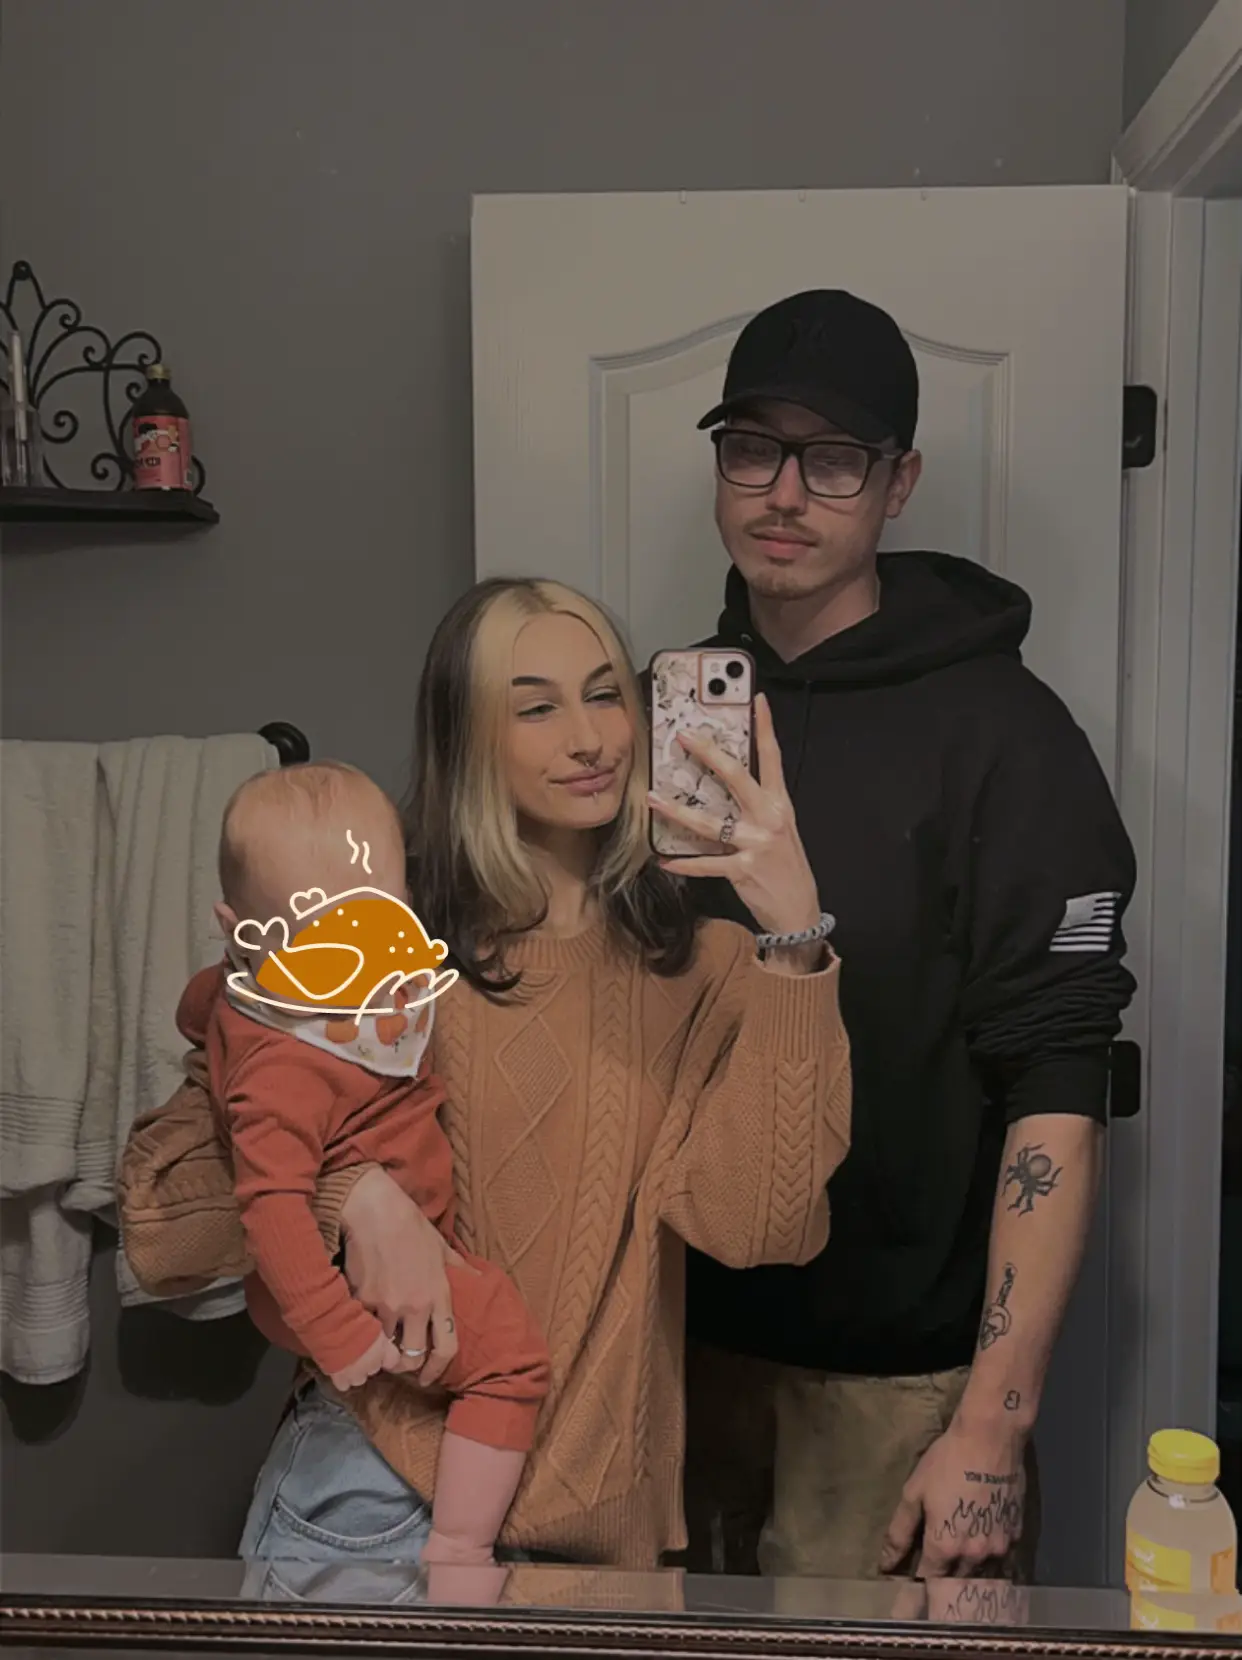  A man and a woman are standing in a bathroom. The woman is taking a selfie with the man and the baby. The man is wearing a black shirt.